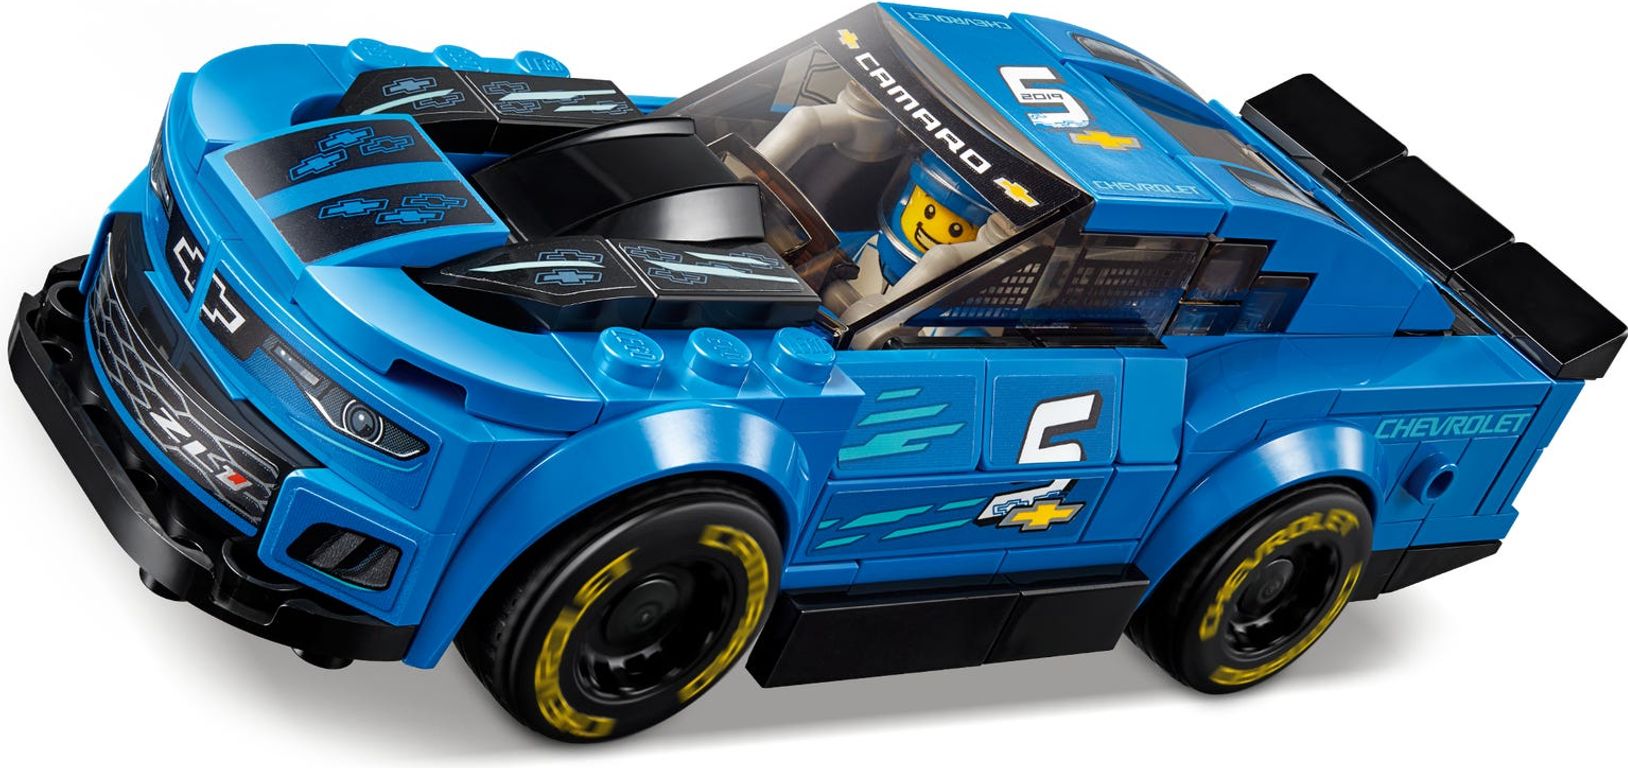 LEGO® Speed Champions Chevrolet Camaro ZL1 Race Car components